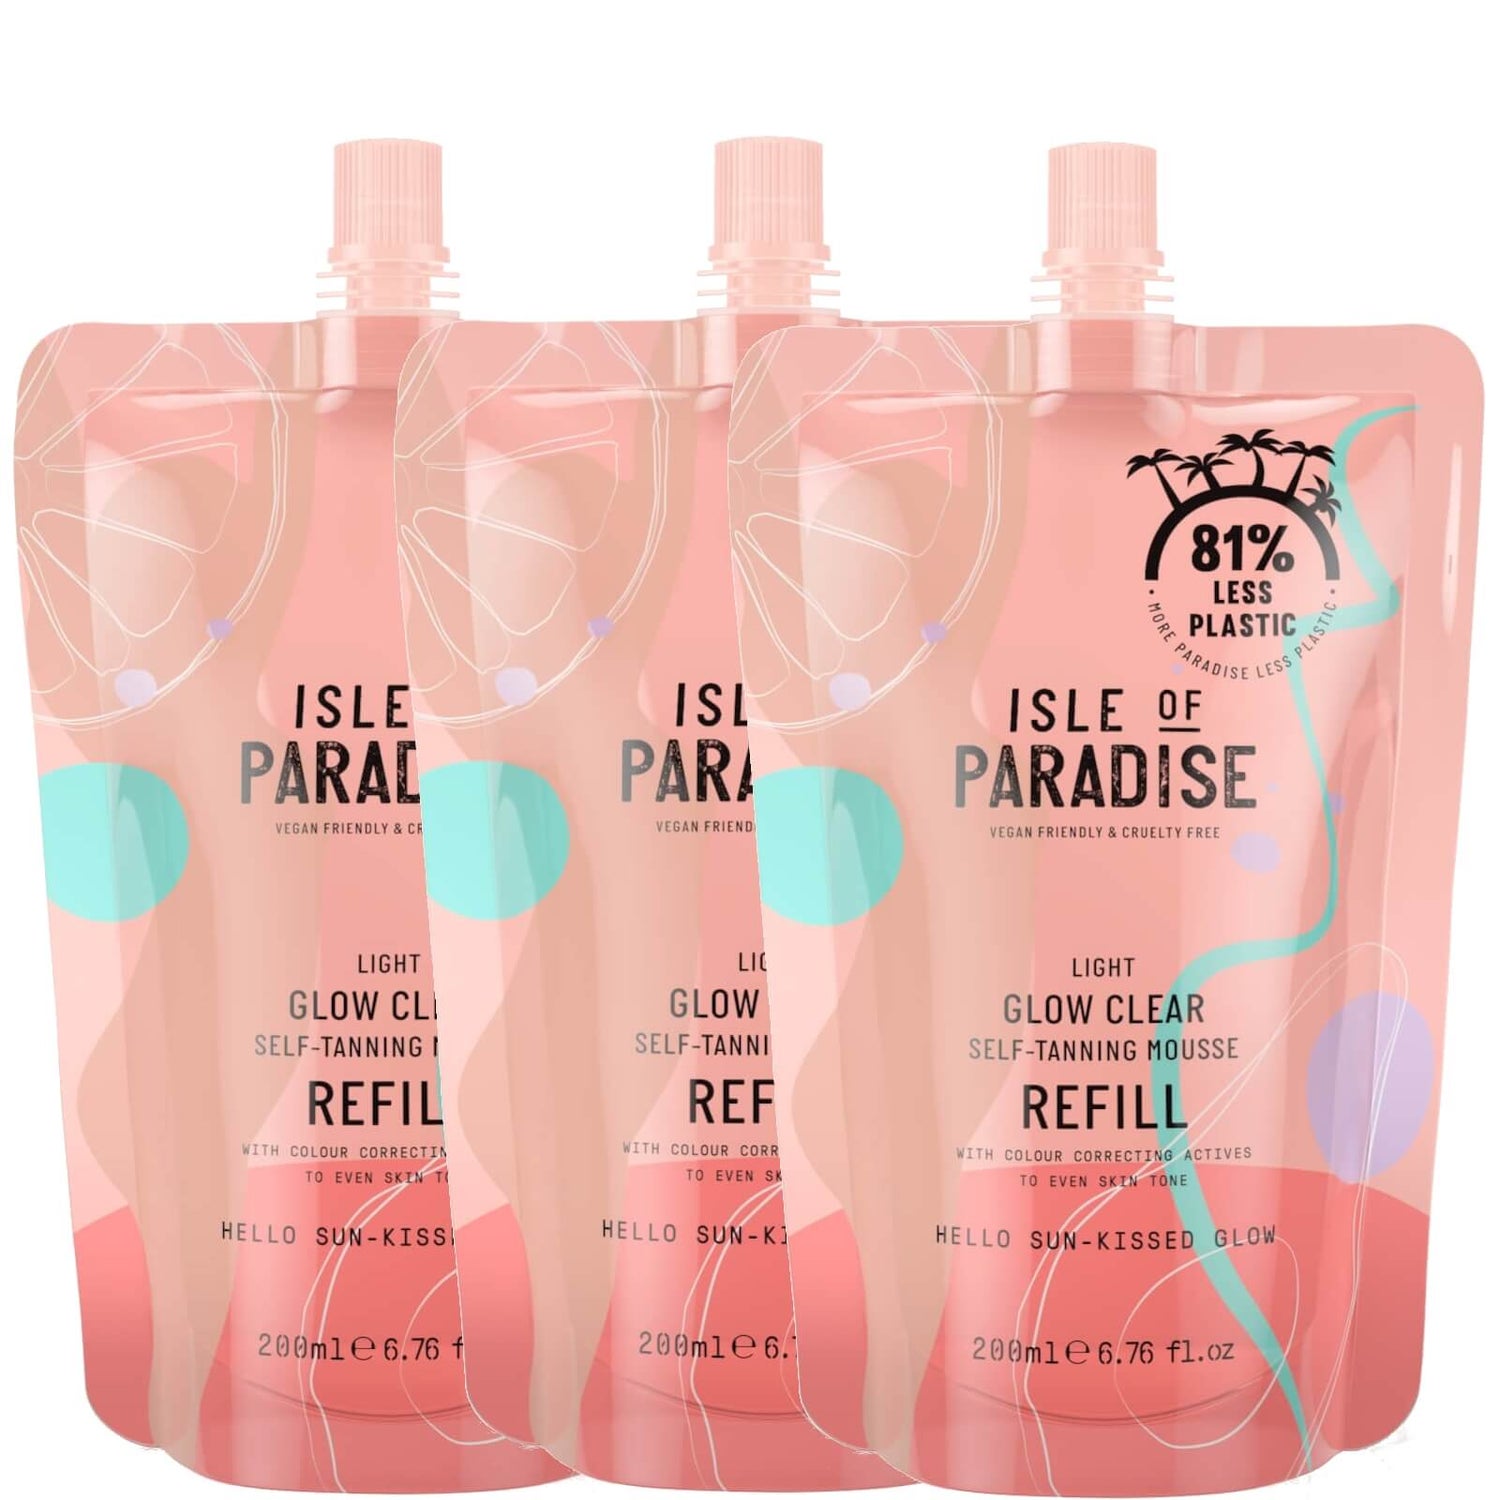 Isle of Paradise Light Glow Clear Mousse Refill Trio (Worth £47.85)